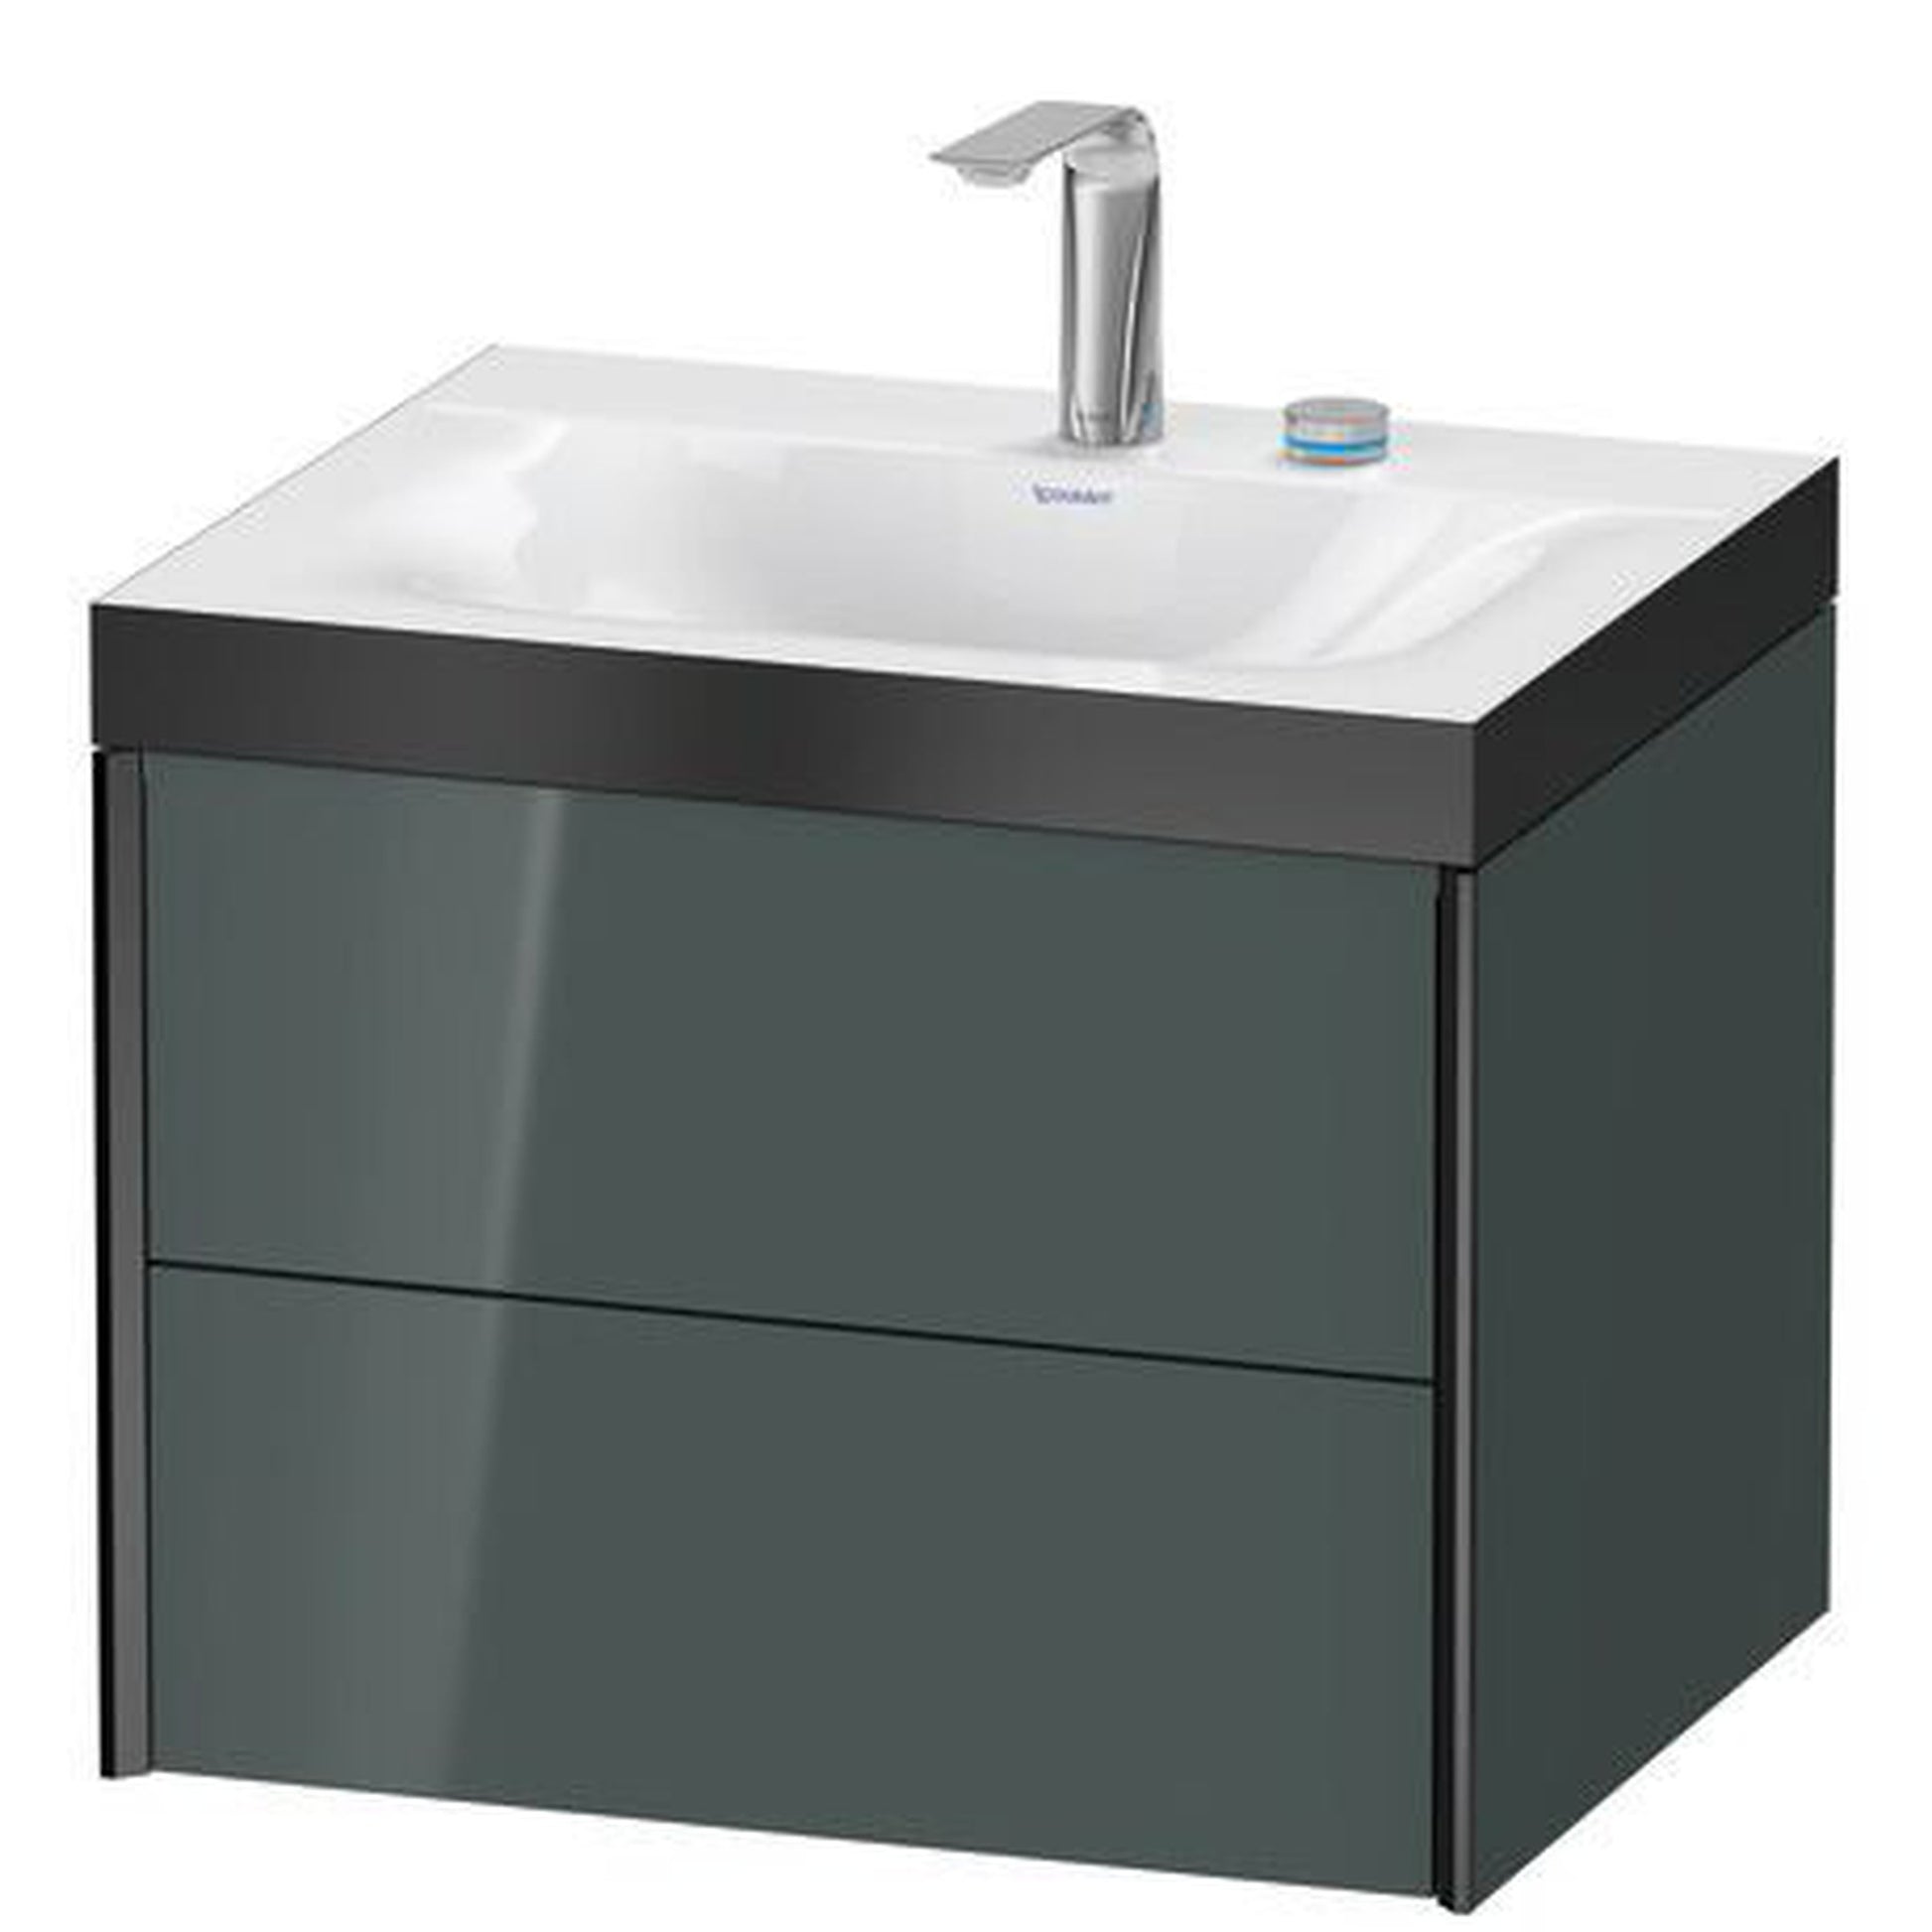 Duravit Xviu 24" x 20" x 19" Two Drawer C-Bonded Wall-Mount Vanity Kit With Two Tap Holes, Dolomite Gray (XV4614EB238P)